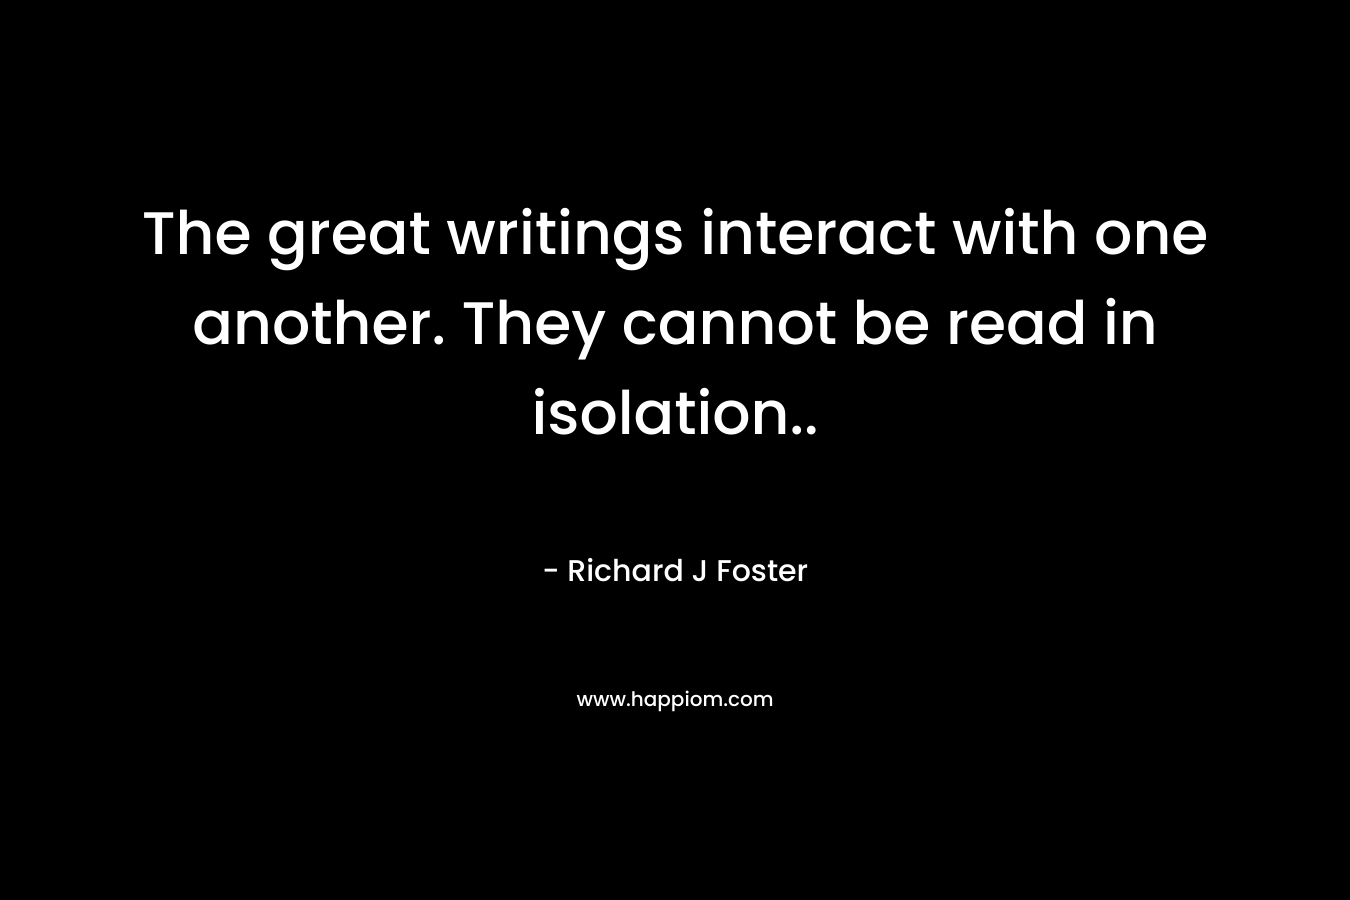 The great writings interact with one another. They cannot be read in isolation..